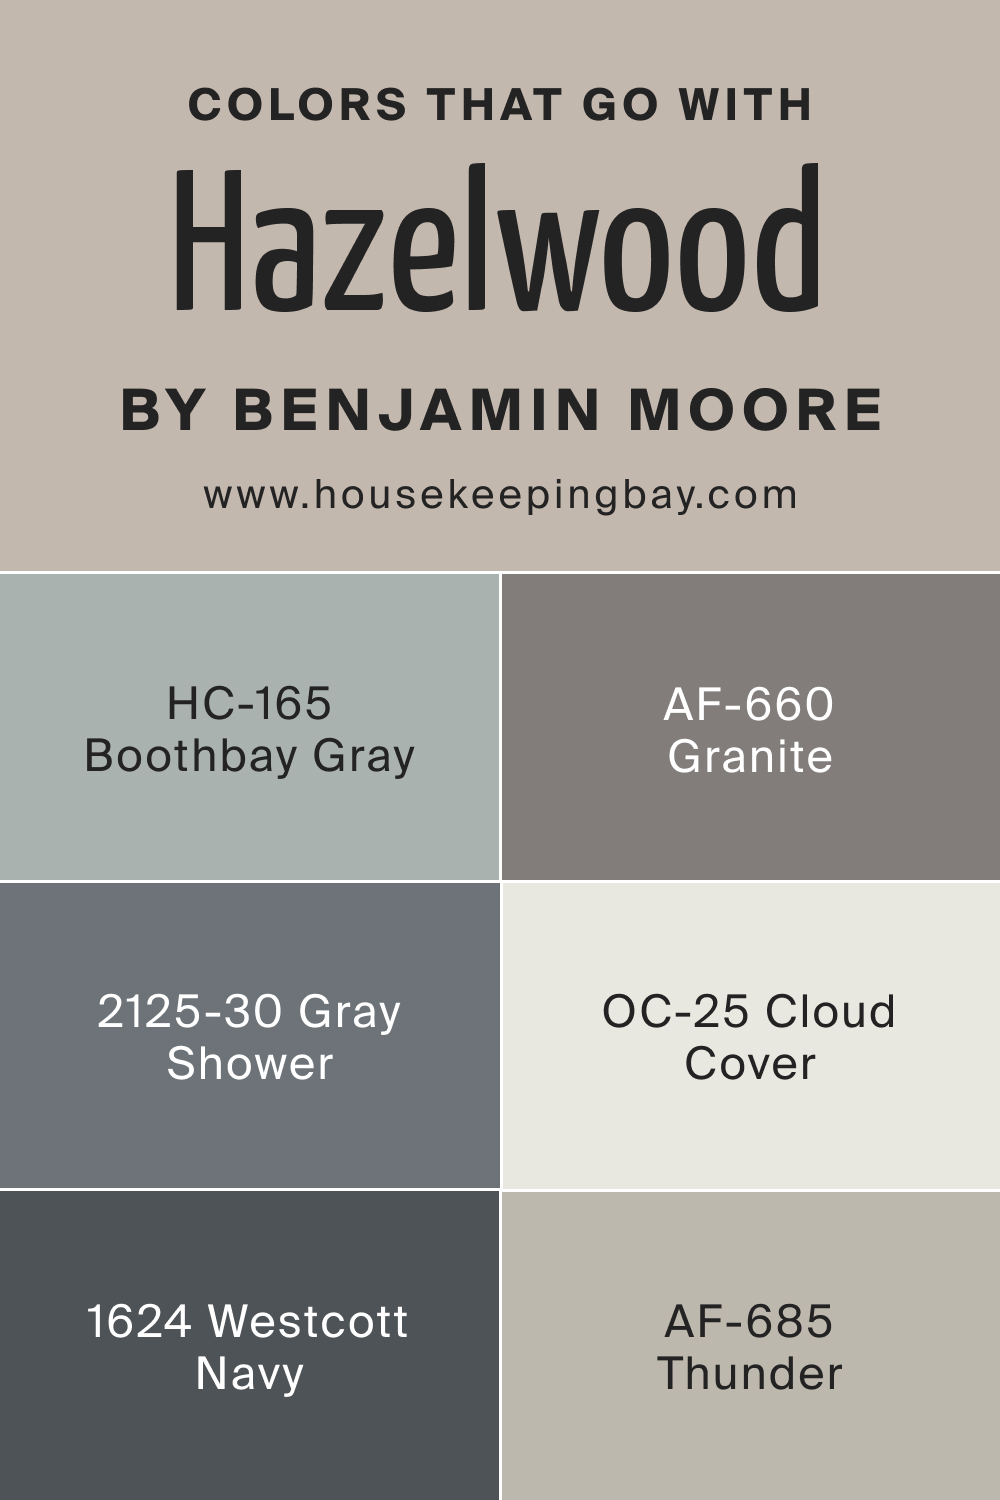 Colors that go with BM Hazelwood 1005 by Benjamin Moore